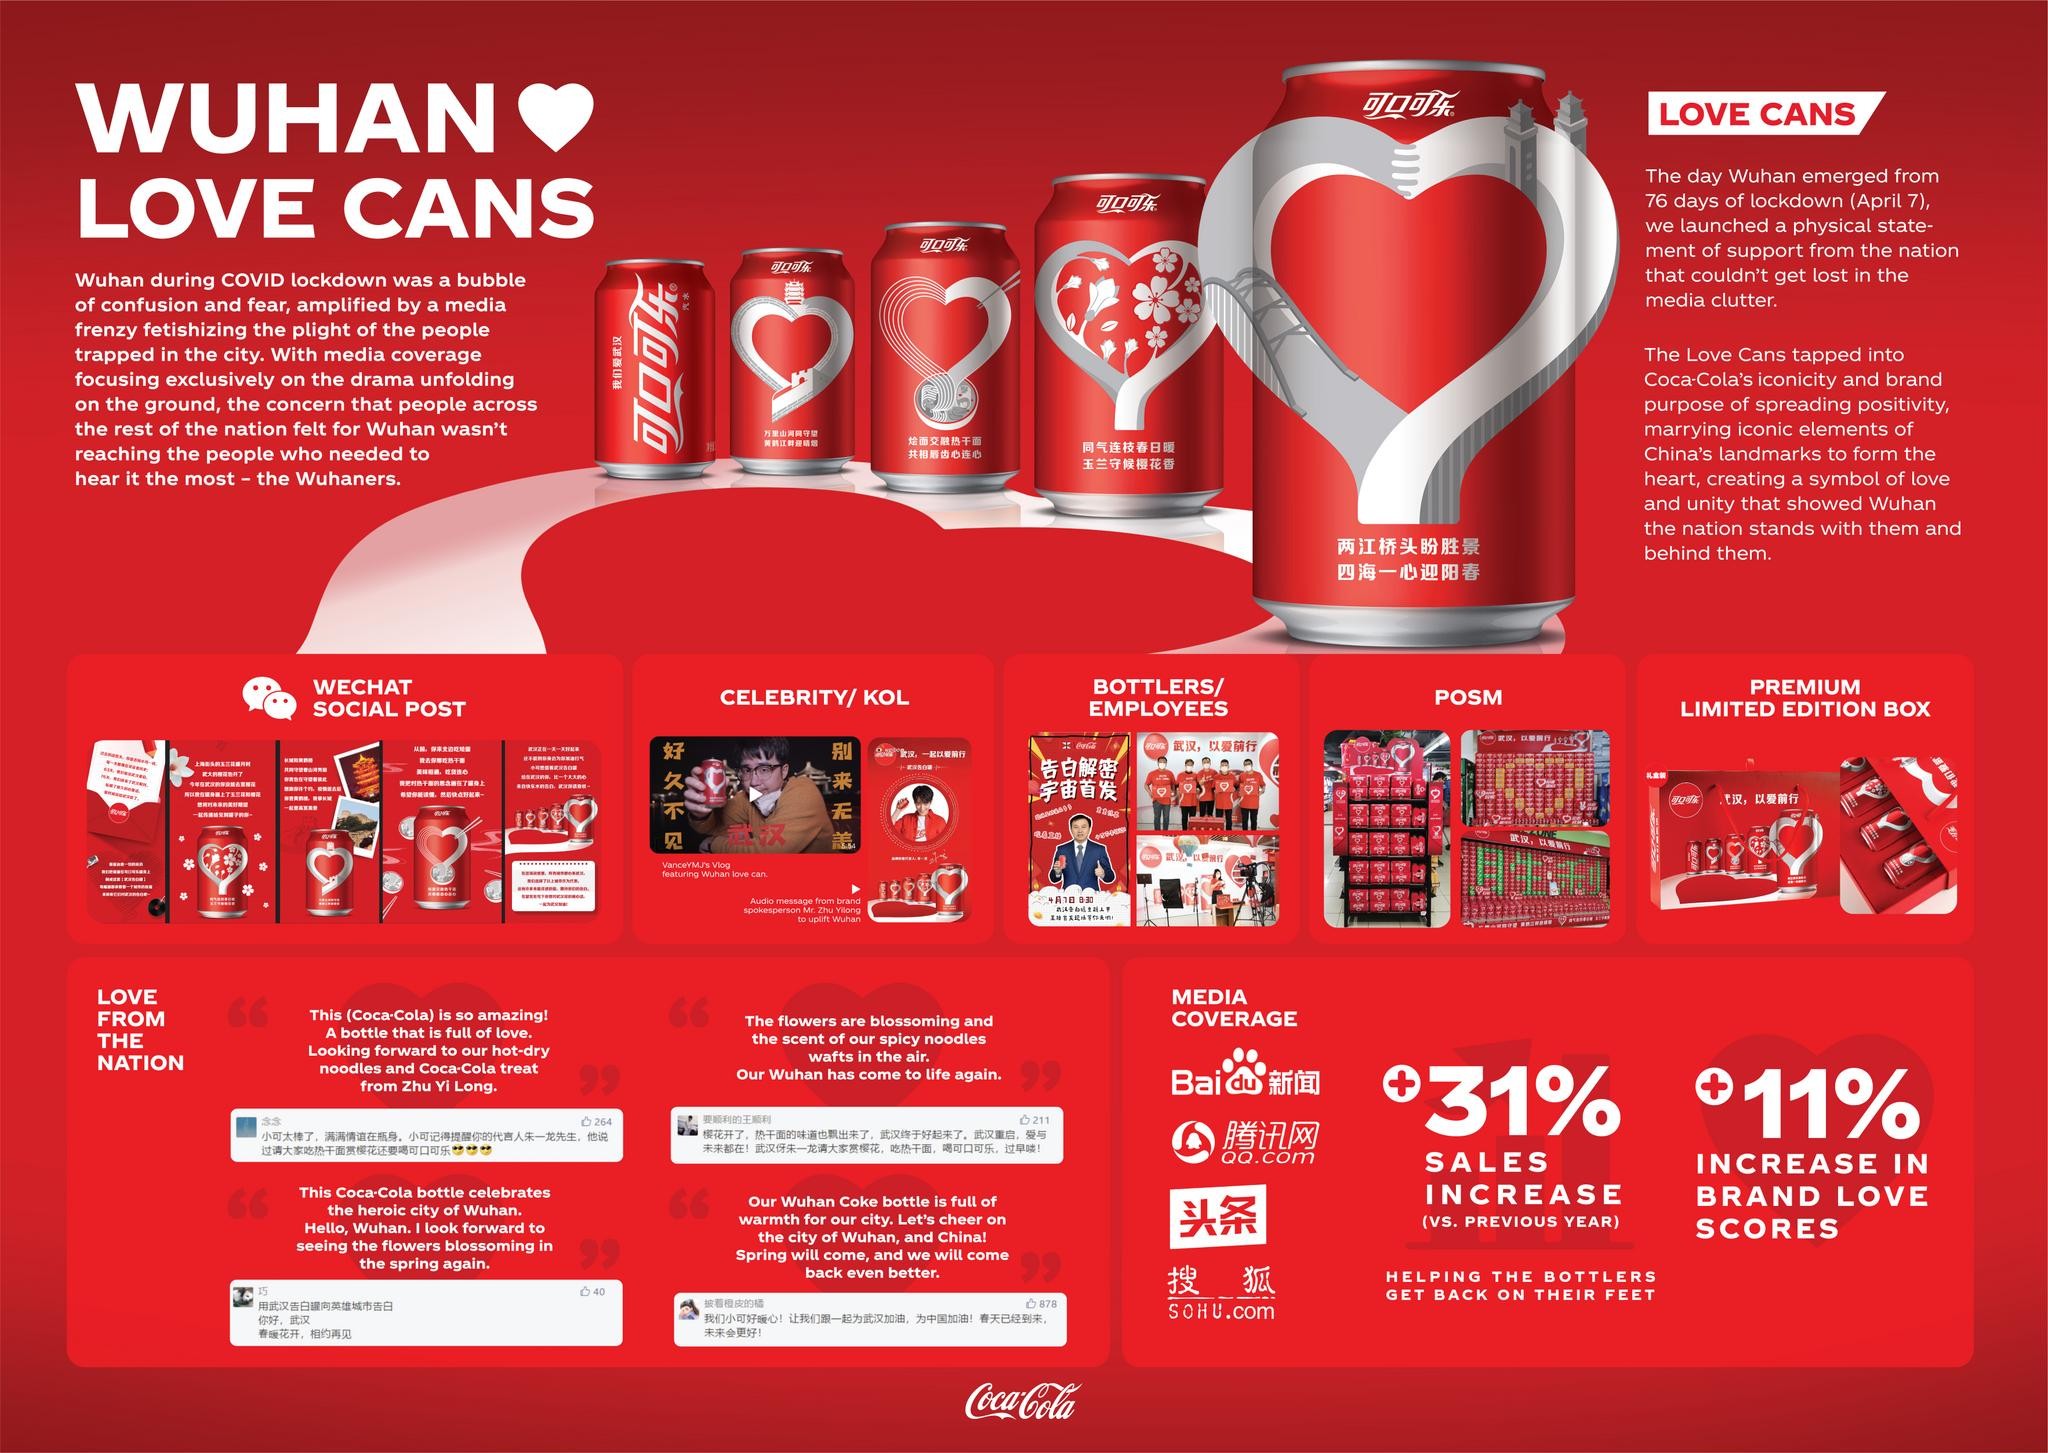 Wuhan Love Cans